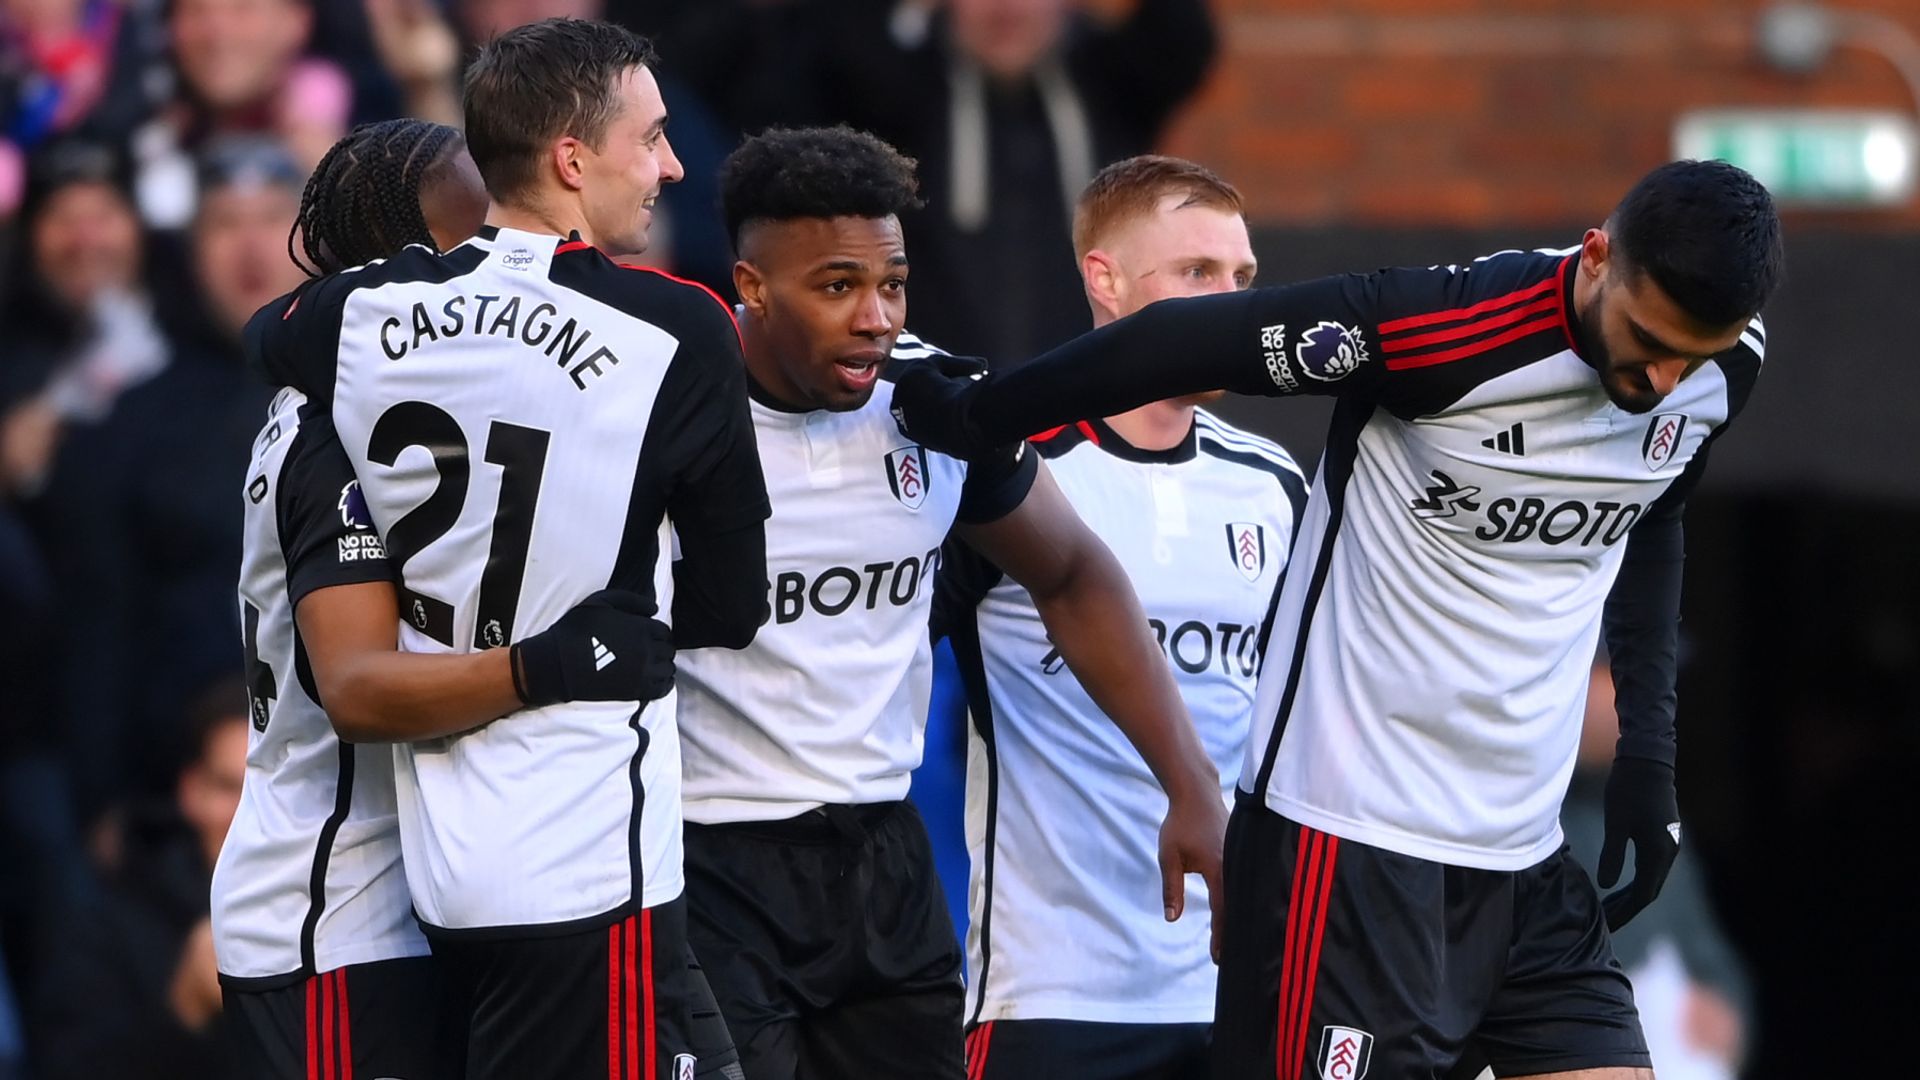 On-song Fulham too strong for lacklustre Brighton